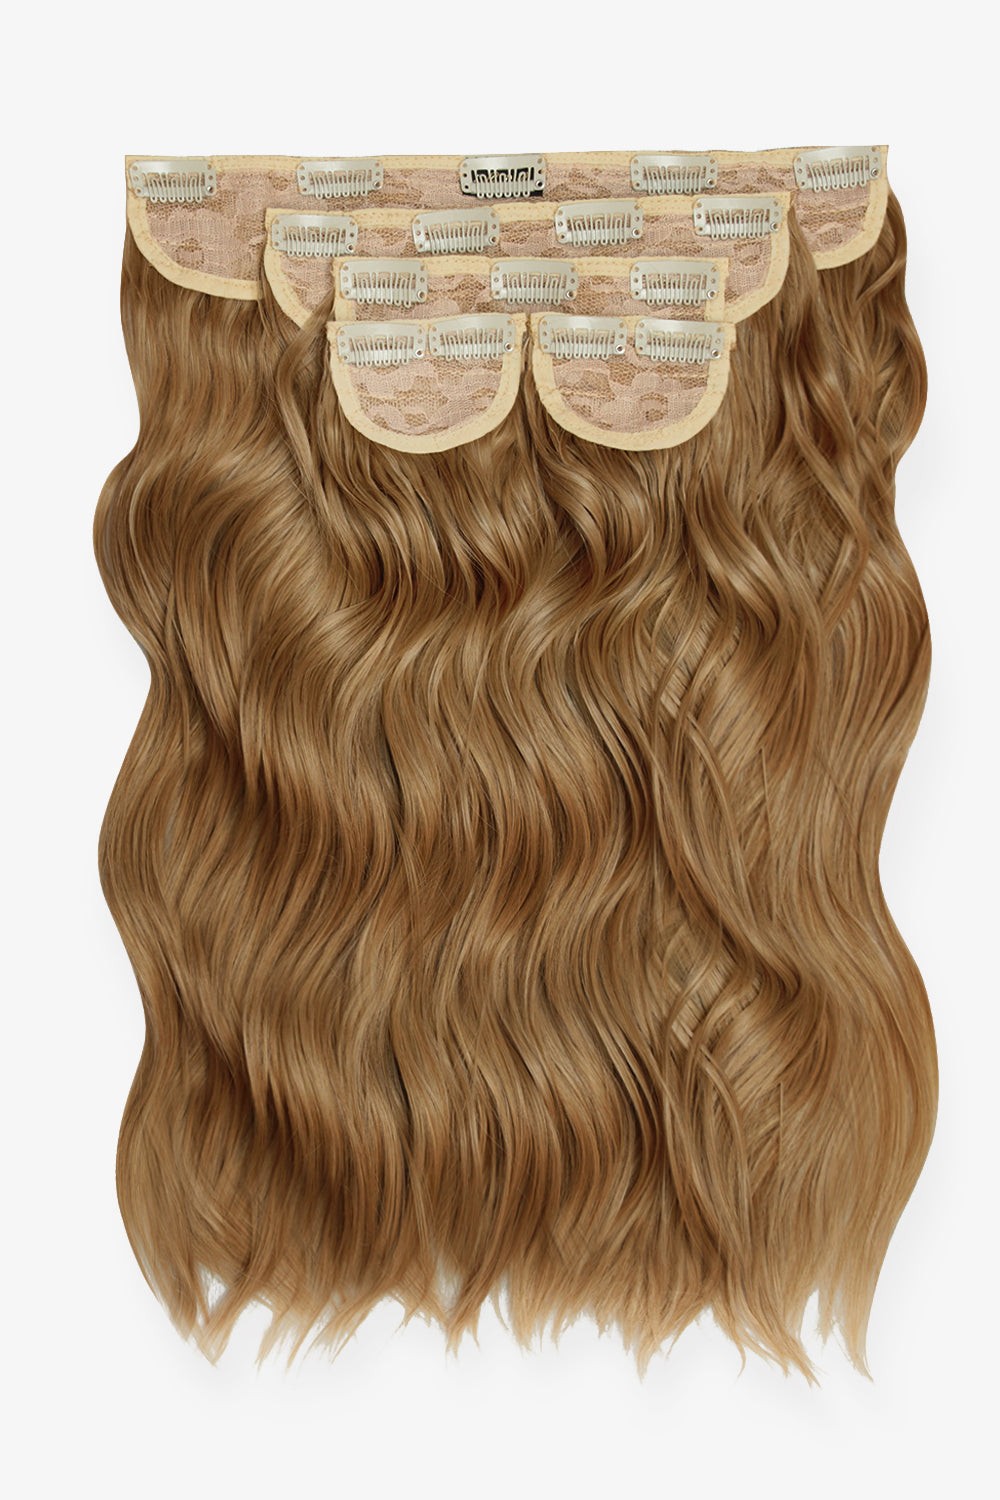 Super Thick 16’’ 5 Piece Brushed Out Wave Clip In Hair Extensions - Harvest Blonde